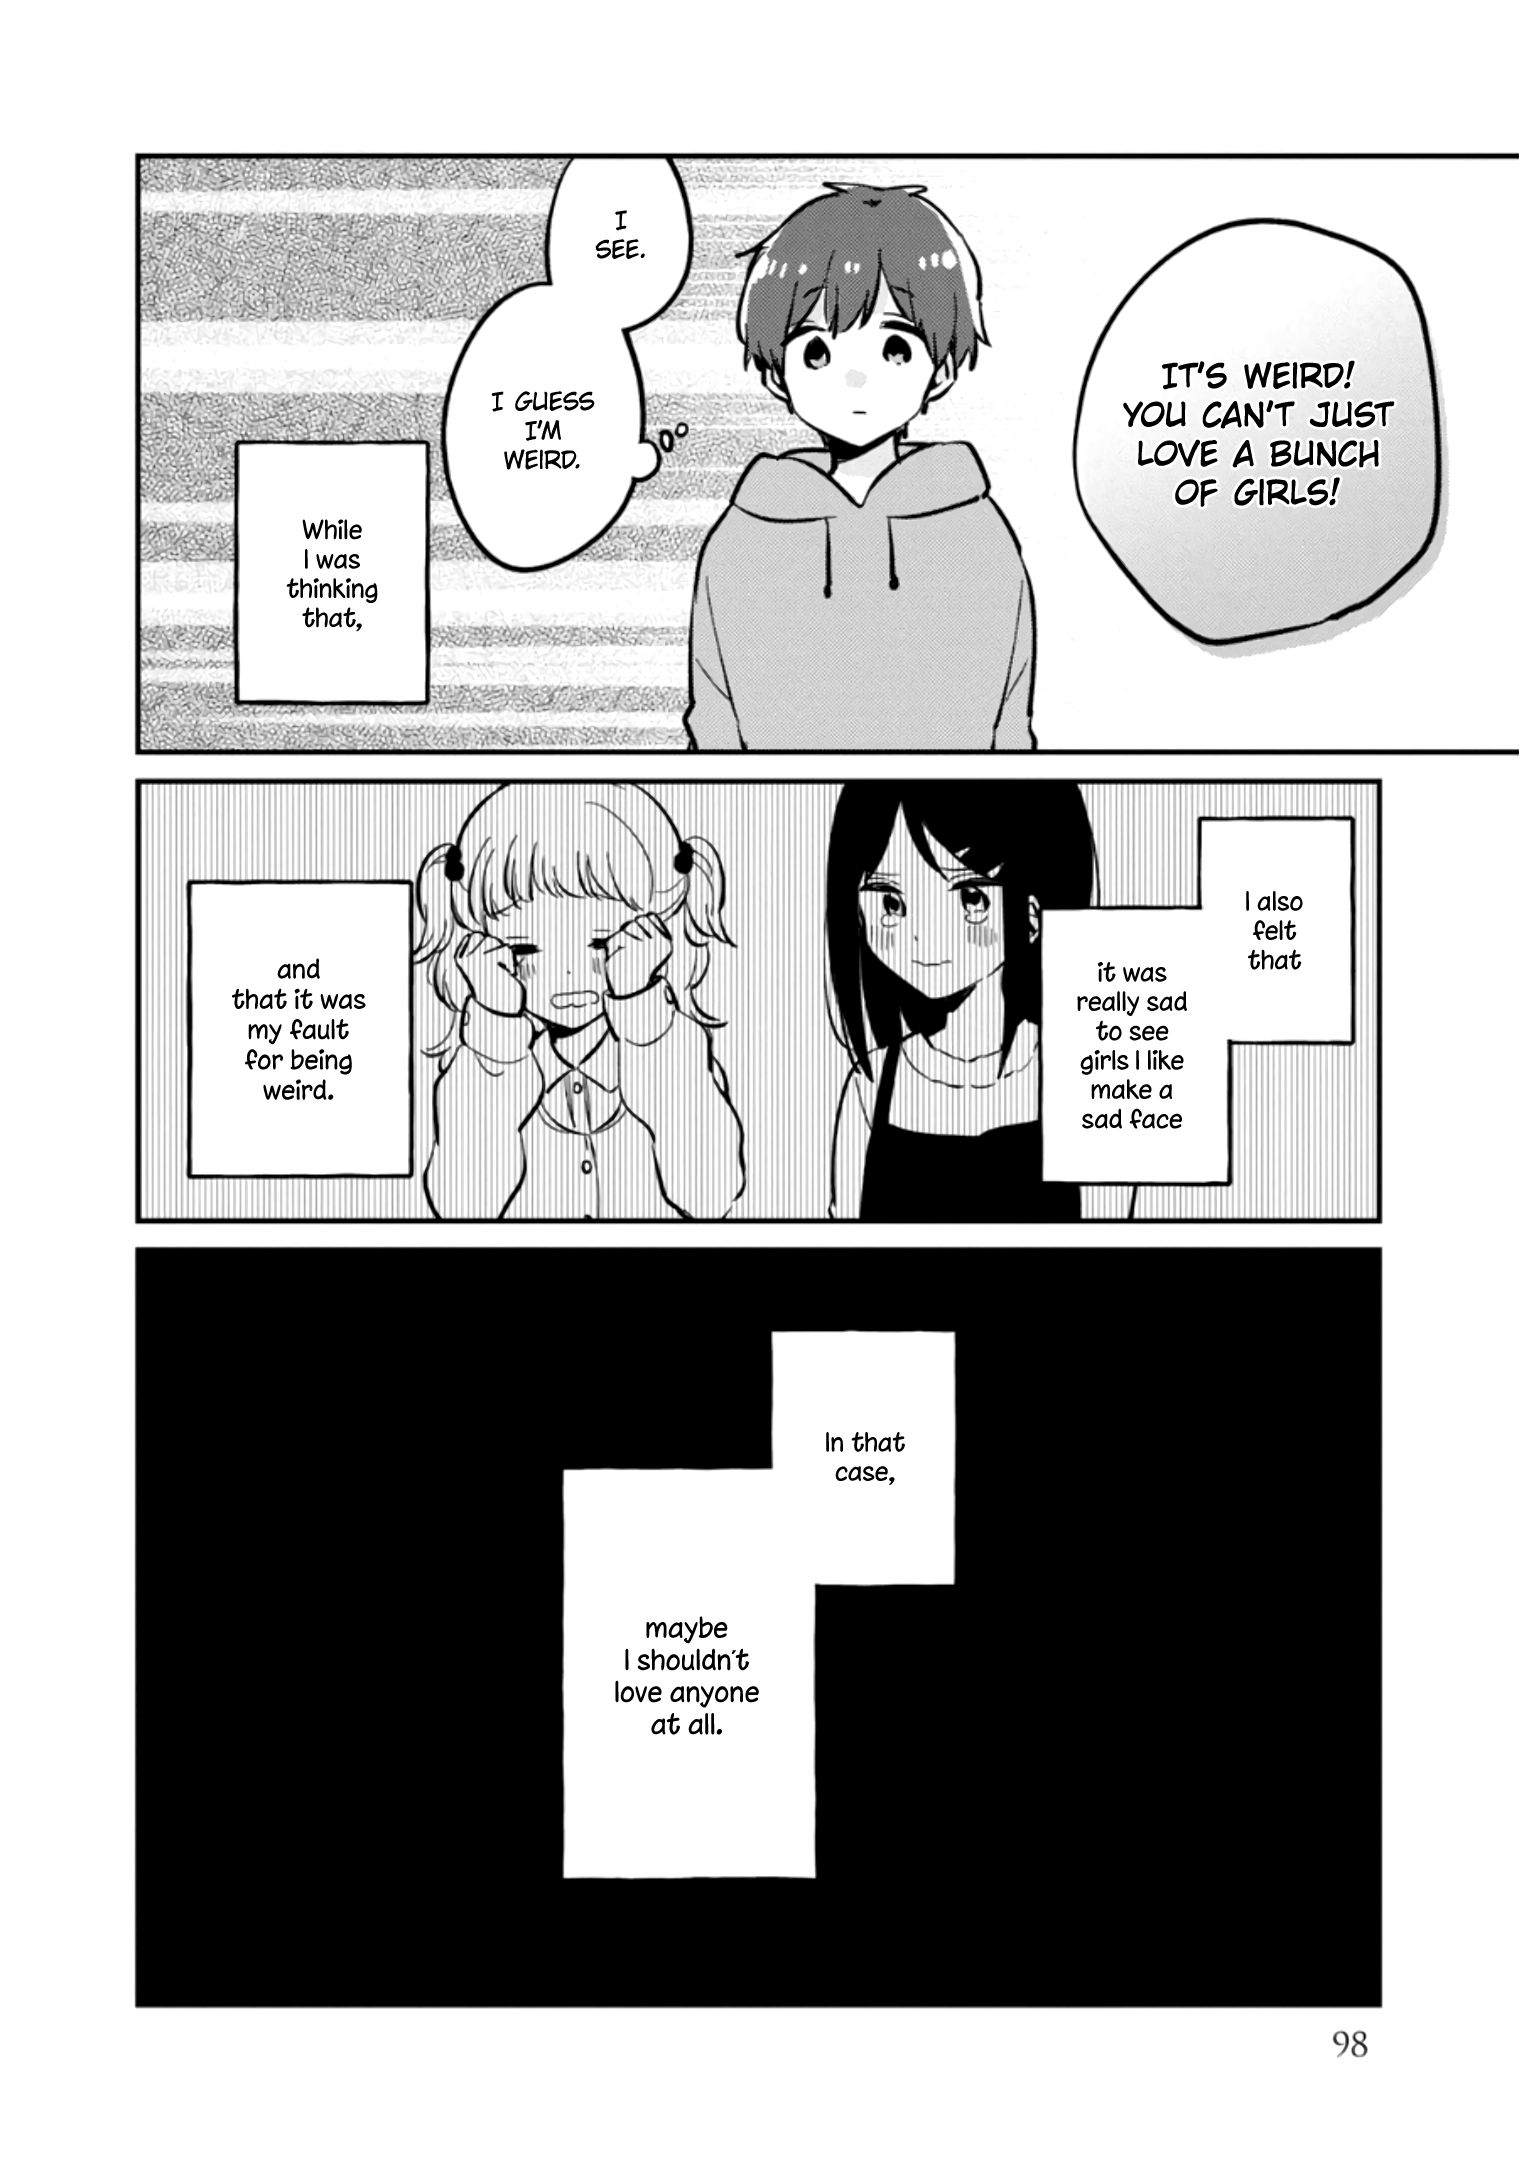 It's Not Meguro-san's First Time chapter 38.5 page 5